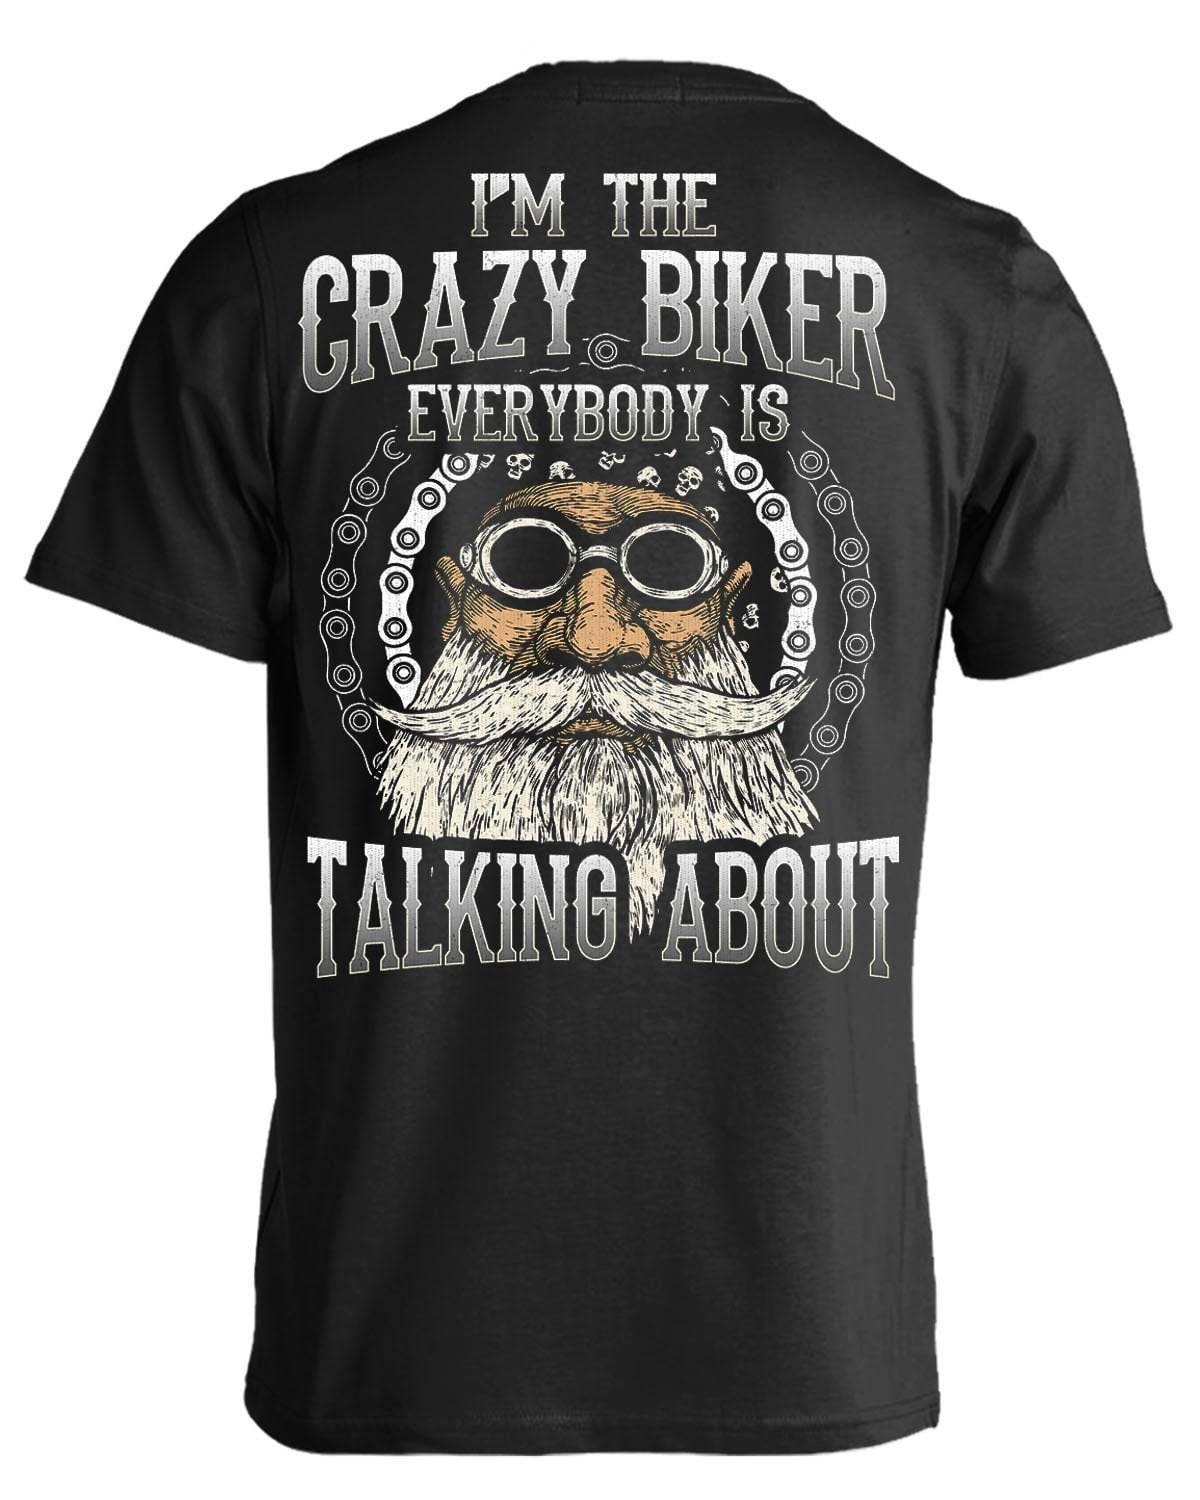 I'm The Crazy Biker Everybody Is Talking About T-Shirt, Cotton, Black - American Legend Rider